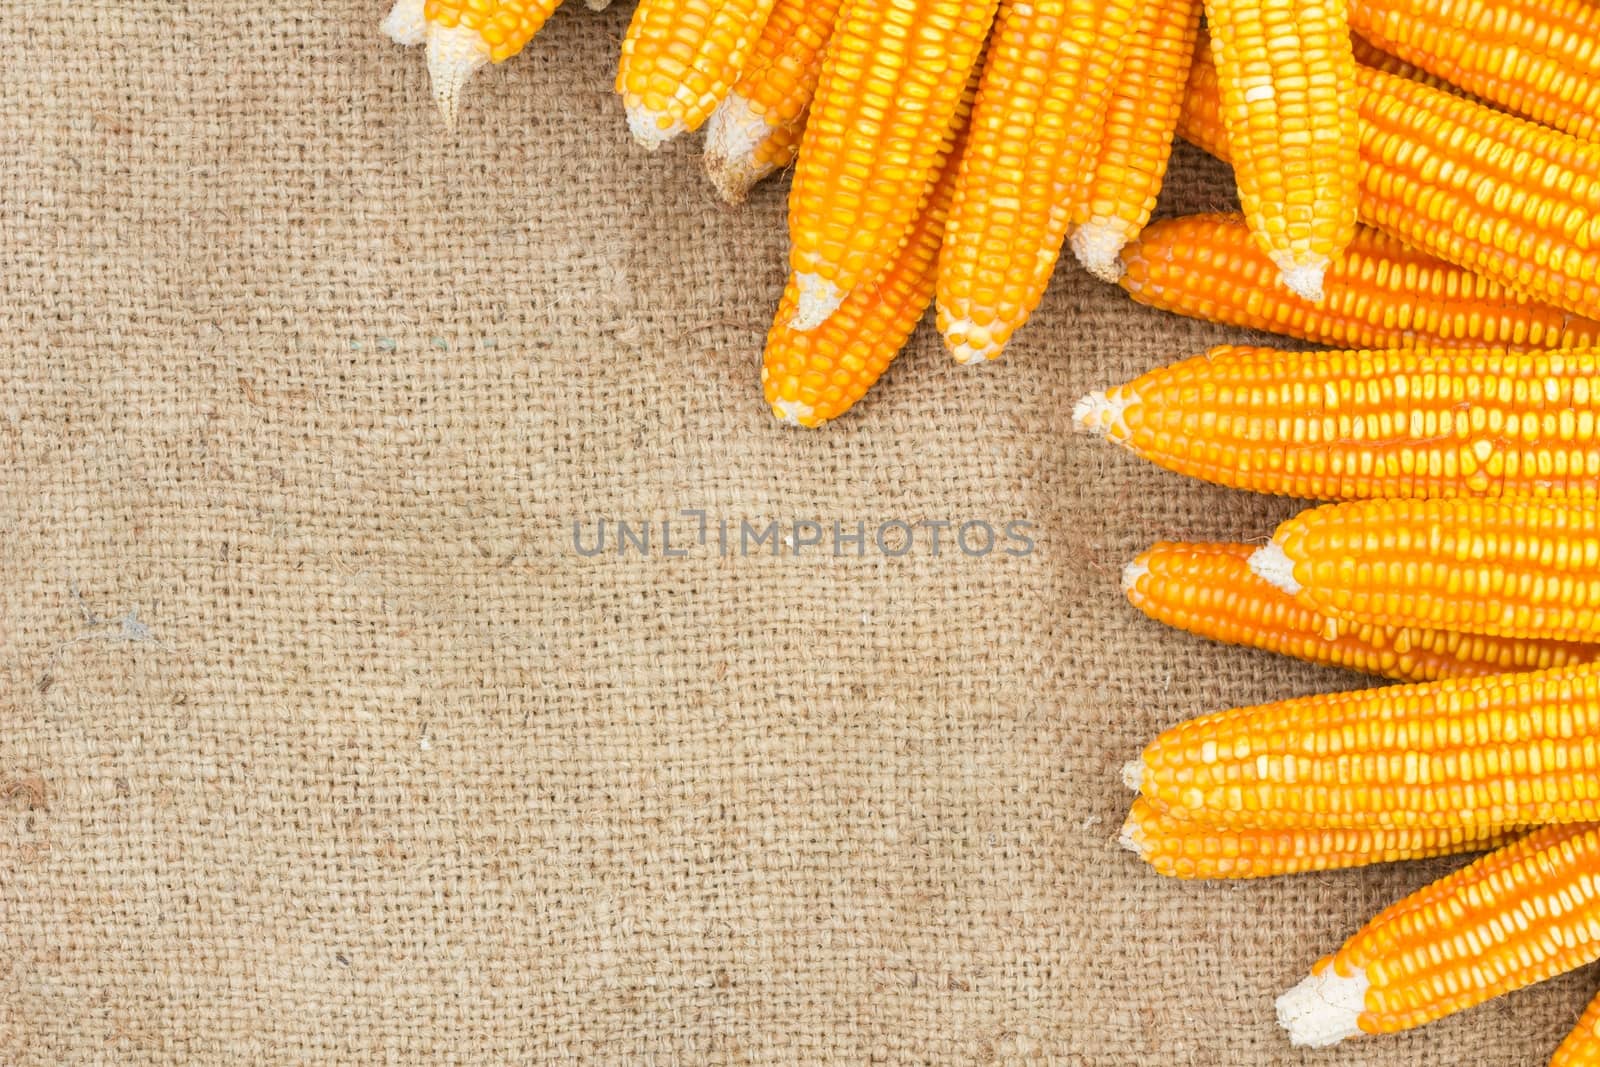 Ears of ripe corn on the gunnysack with space for special text on the left